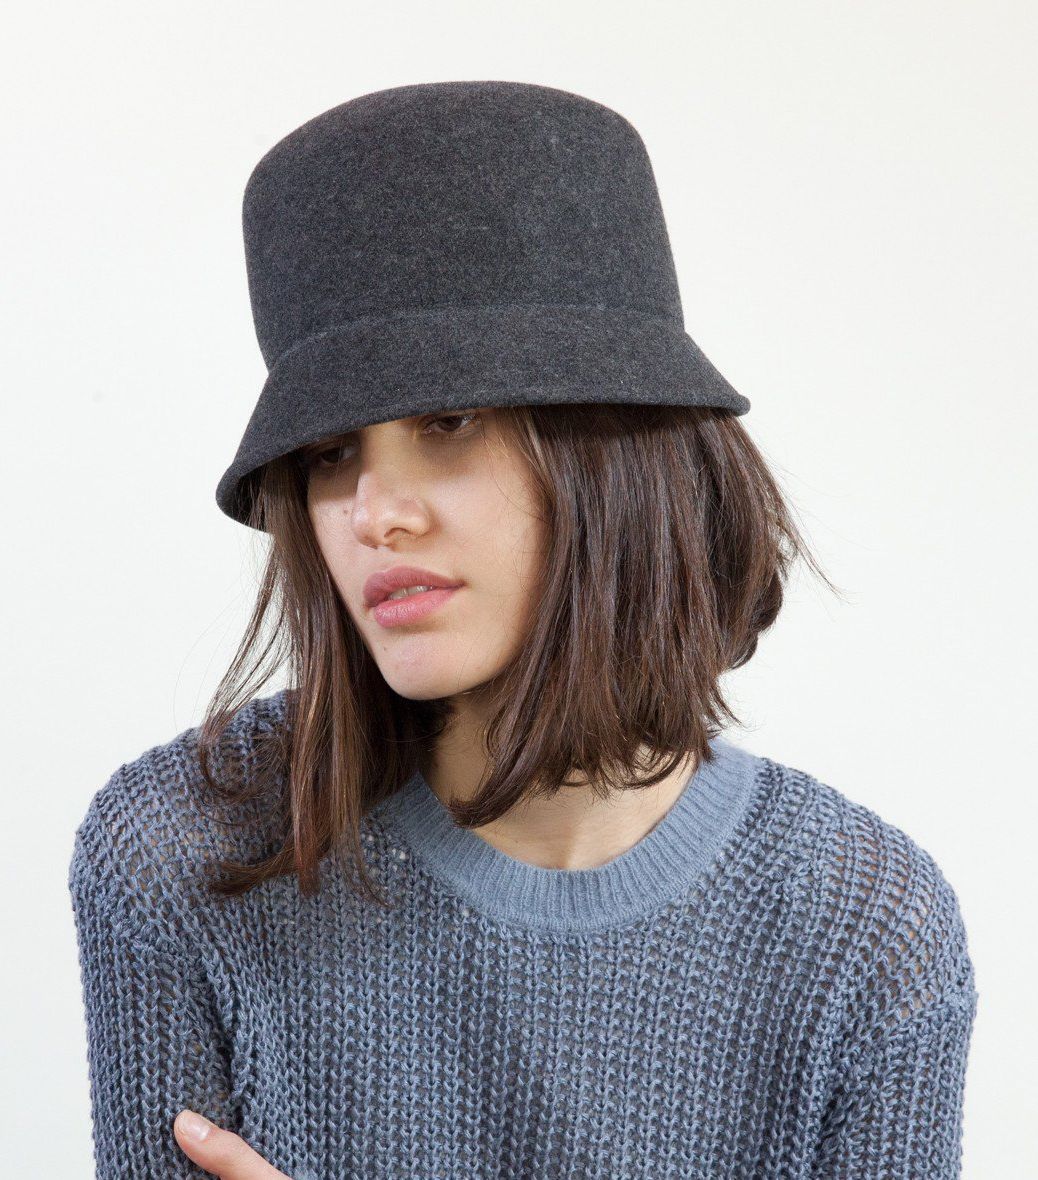 Fall Hat Styles Everyone Should Try | Who What Wear